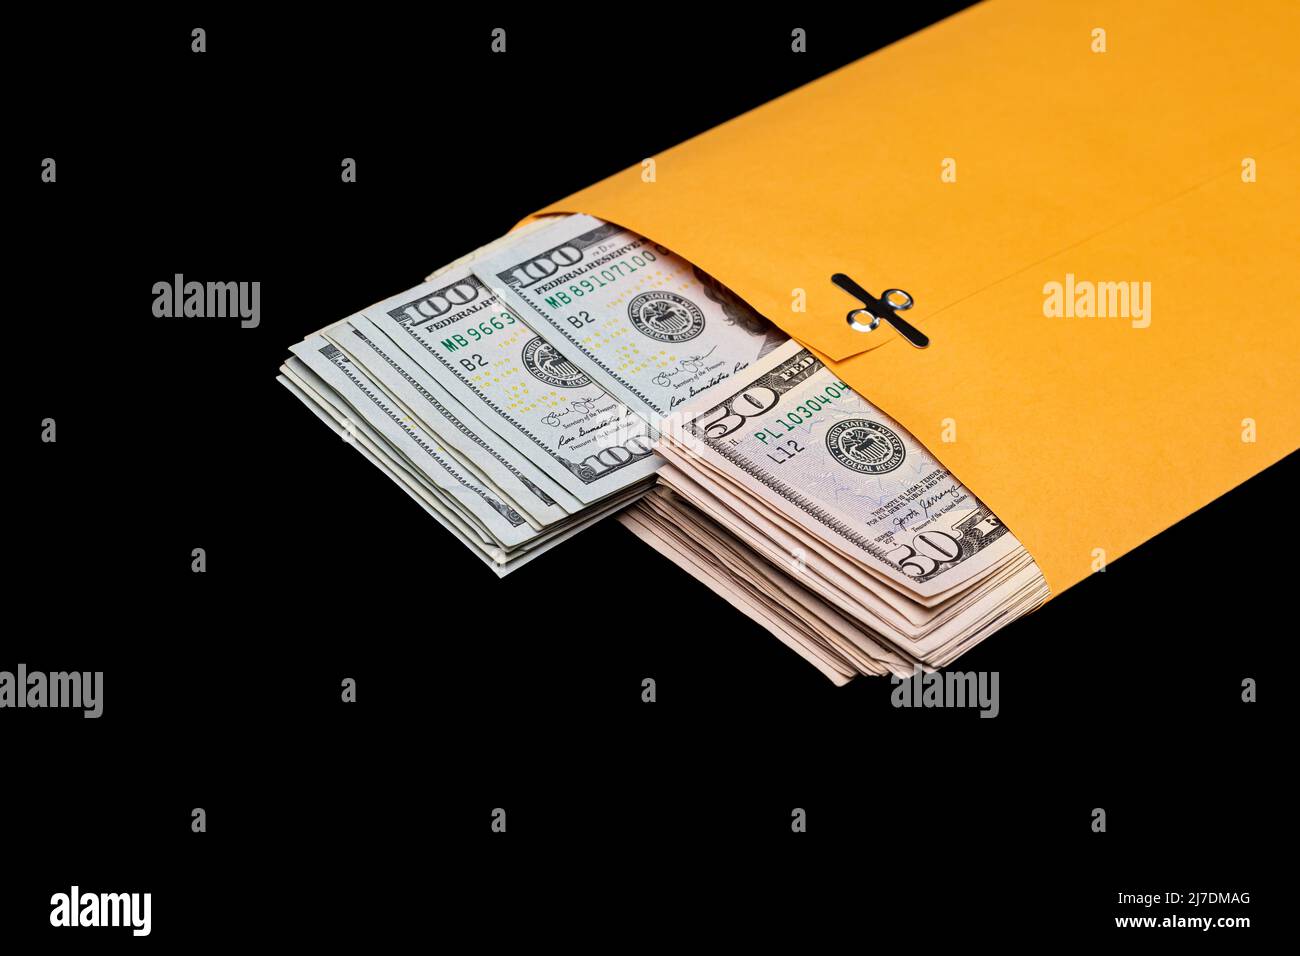 Cash money in envelope isolated on black background. Bribe, crime and corruption concept. Stock Photo